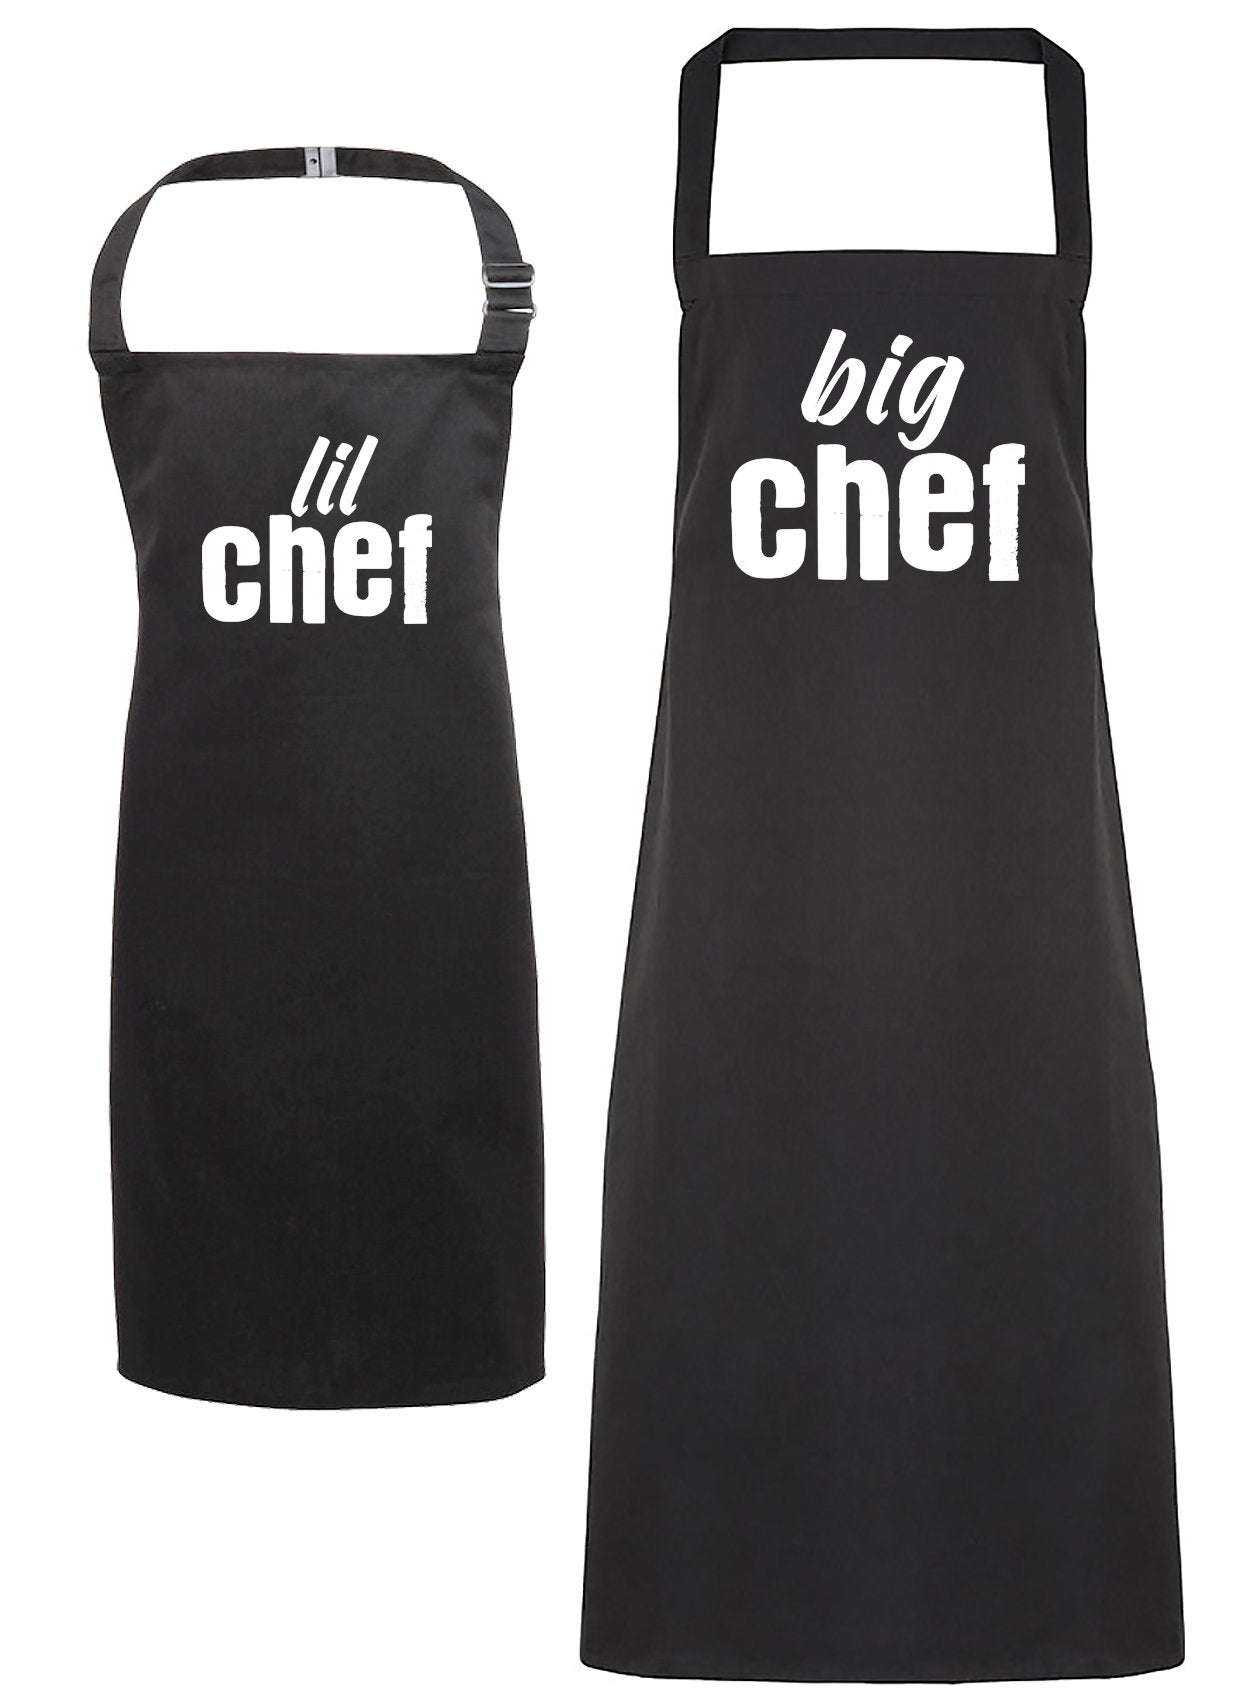 Big Chef & Lil Chef - Adult & Kids Aprons - (Sold Separately)